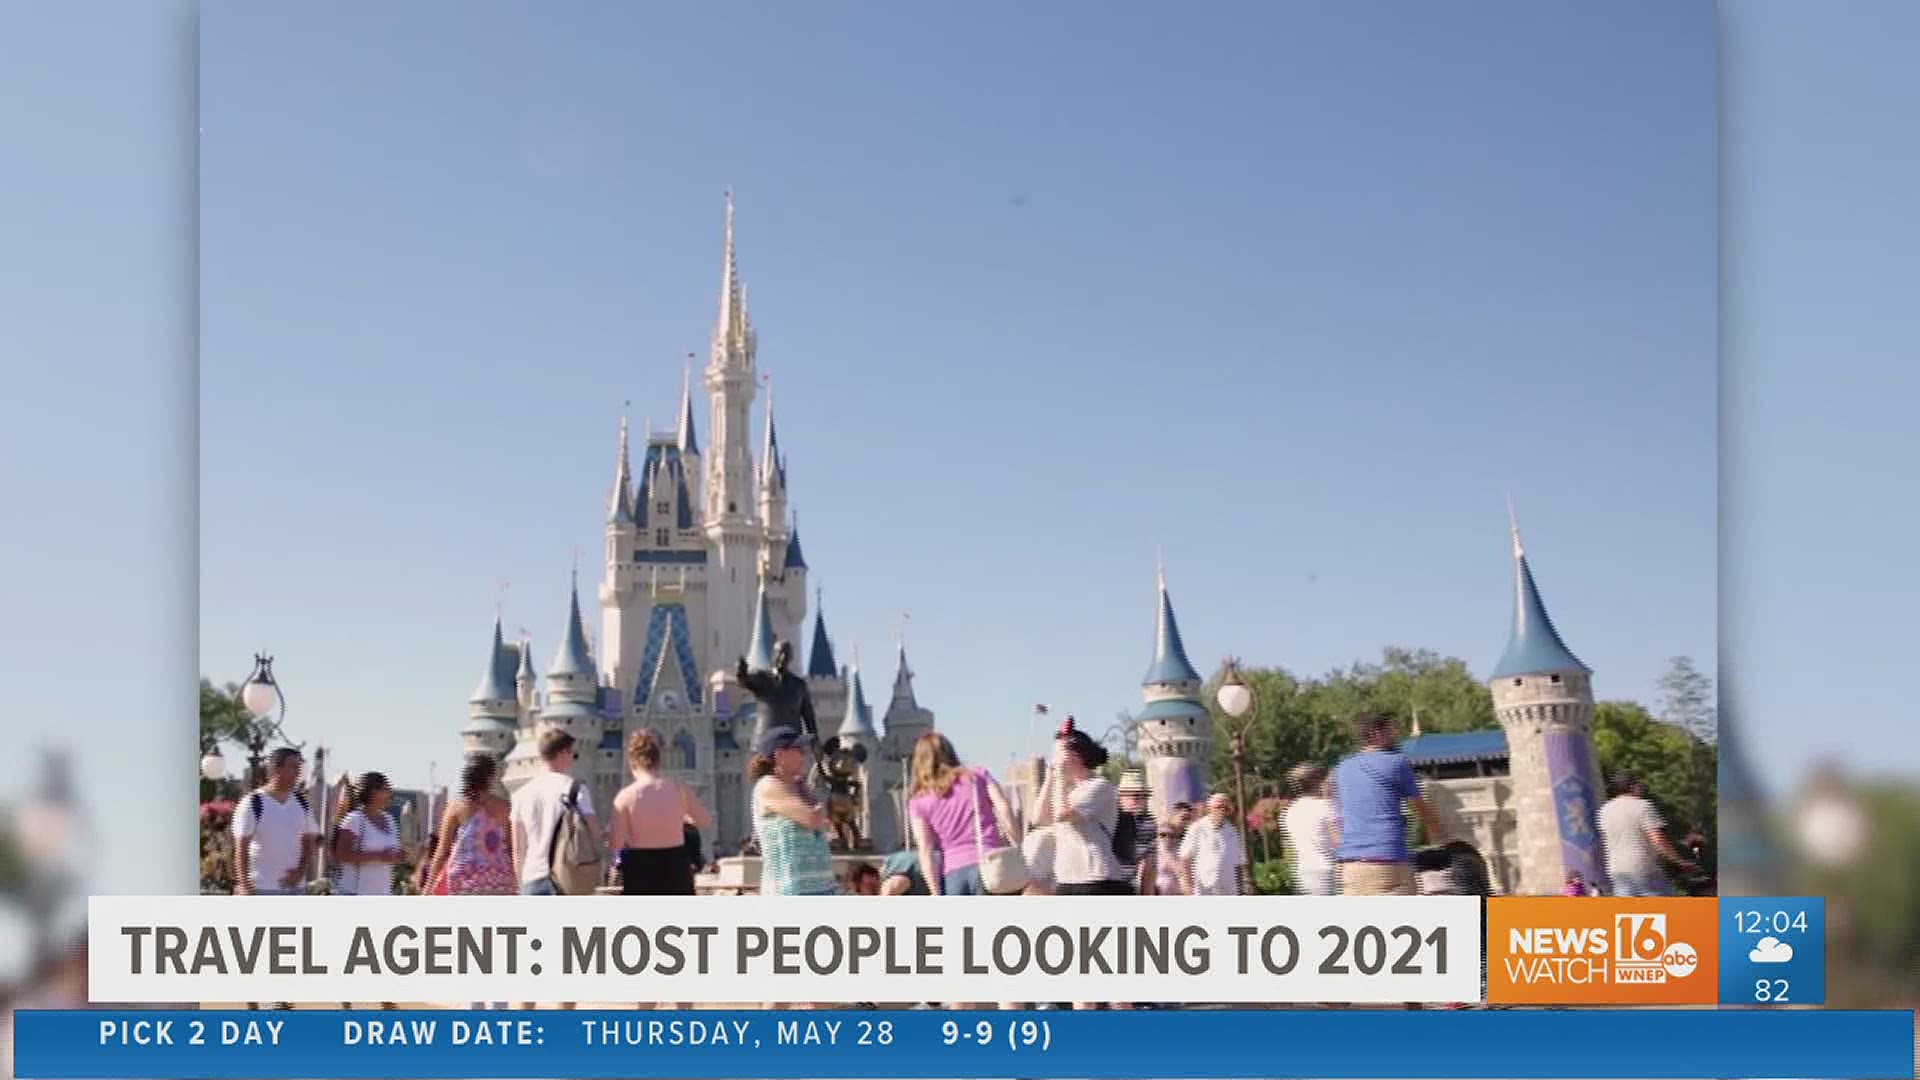 Travel plans are usually pretty important this time of year, but as one travel agent tells us, most folks are scrapping their plans for 2020.